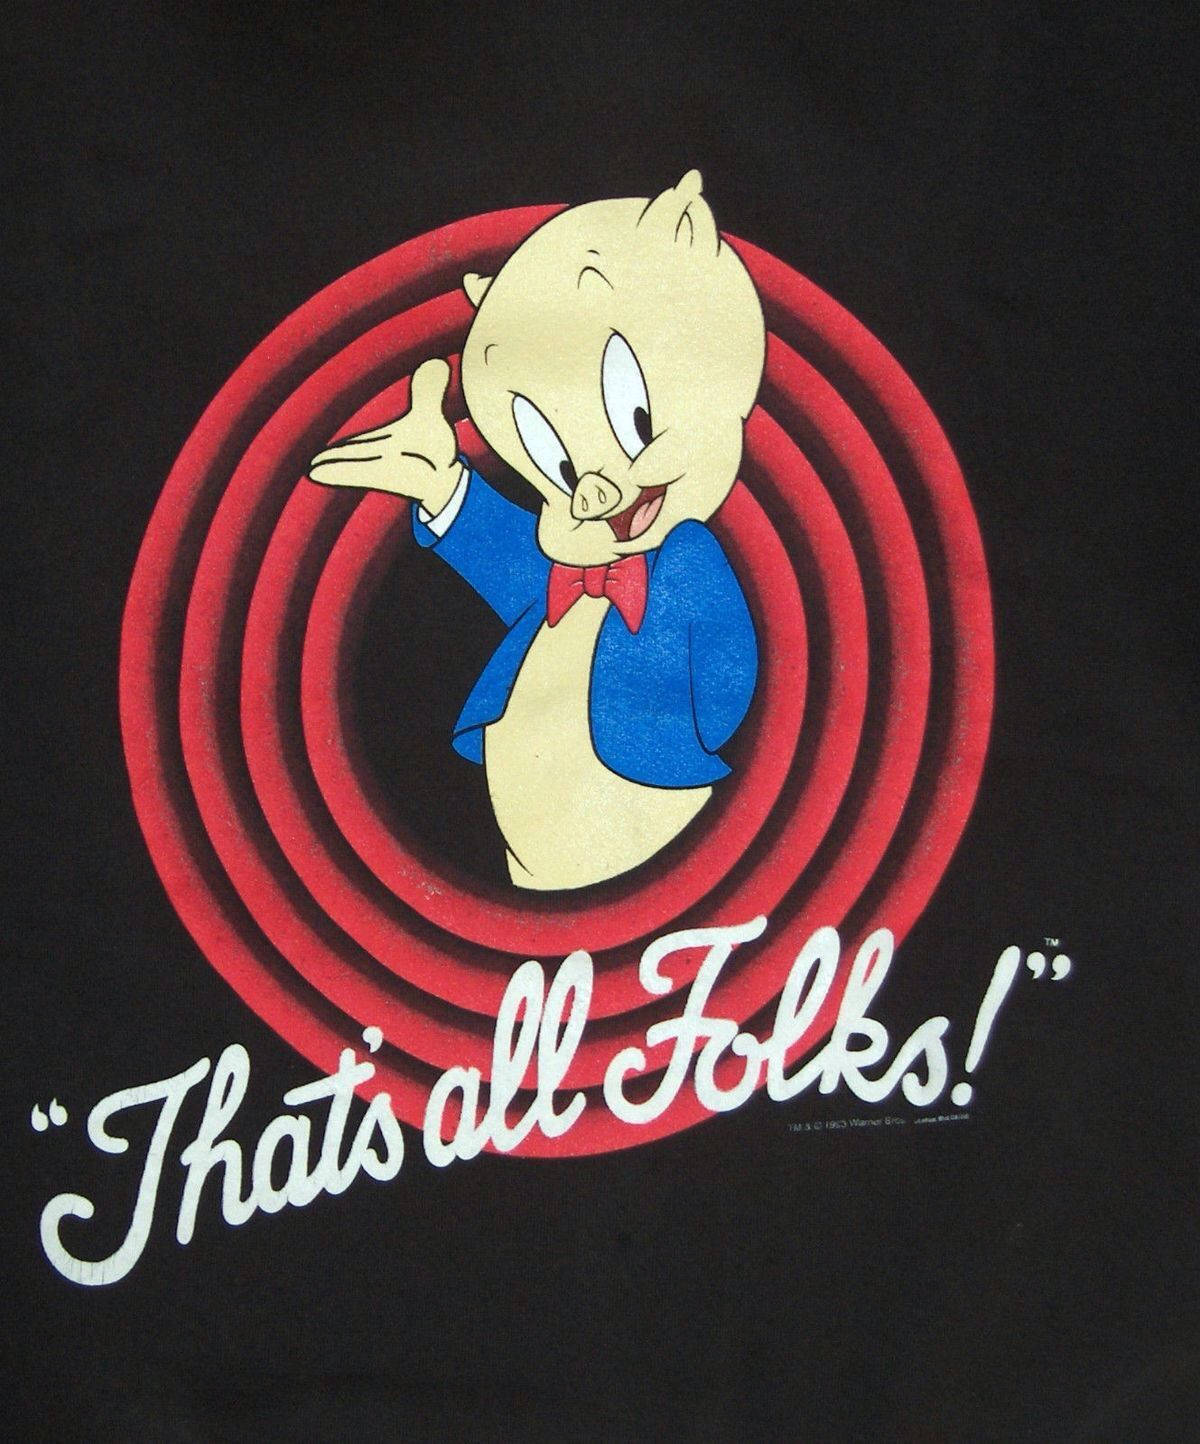 That's All Folks! - Porky Pig. Looney Tunes Wallpaper, Looney Tunes Cartoons, Looney Tunes Show